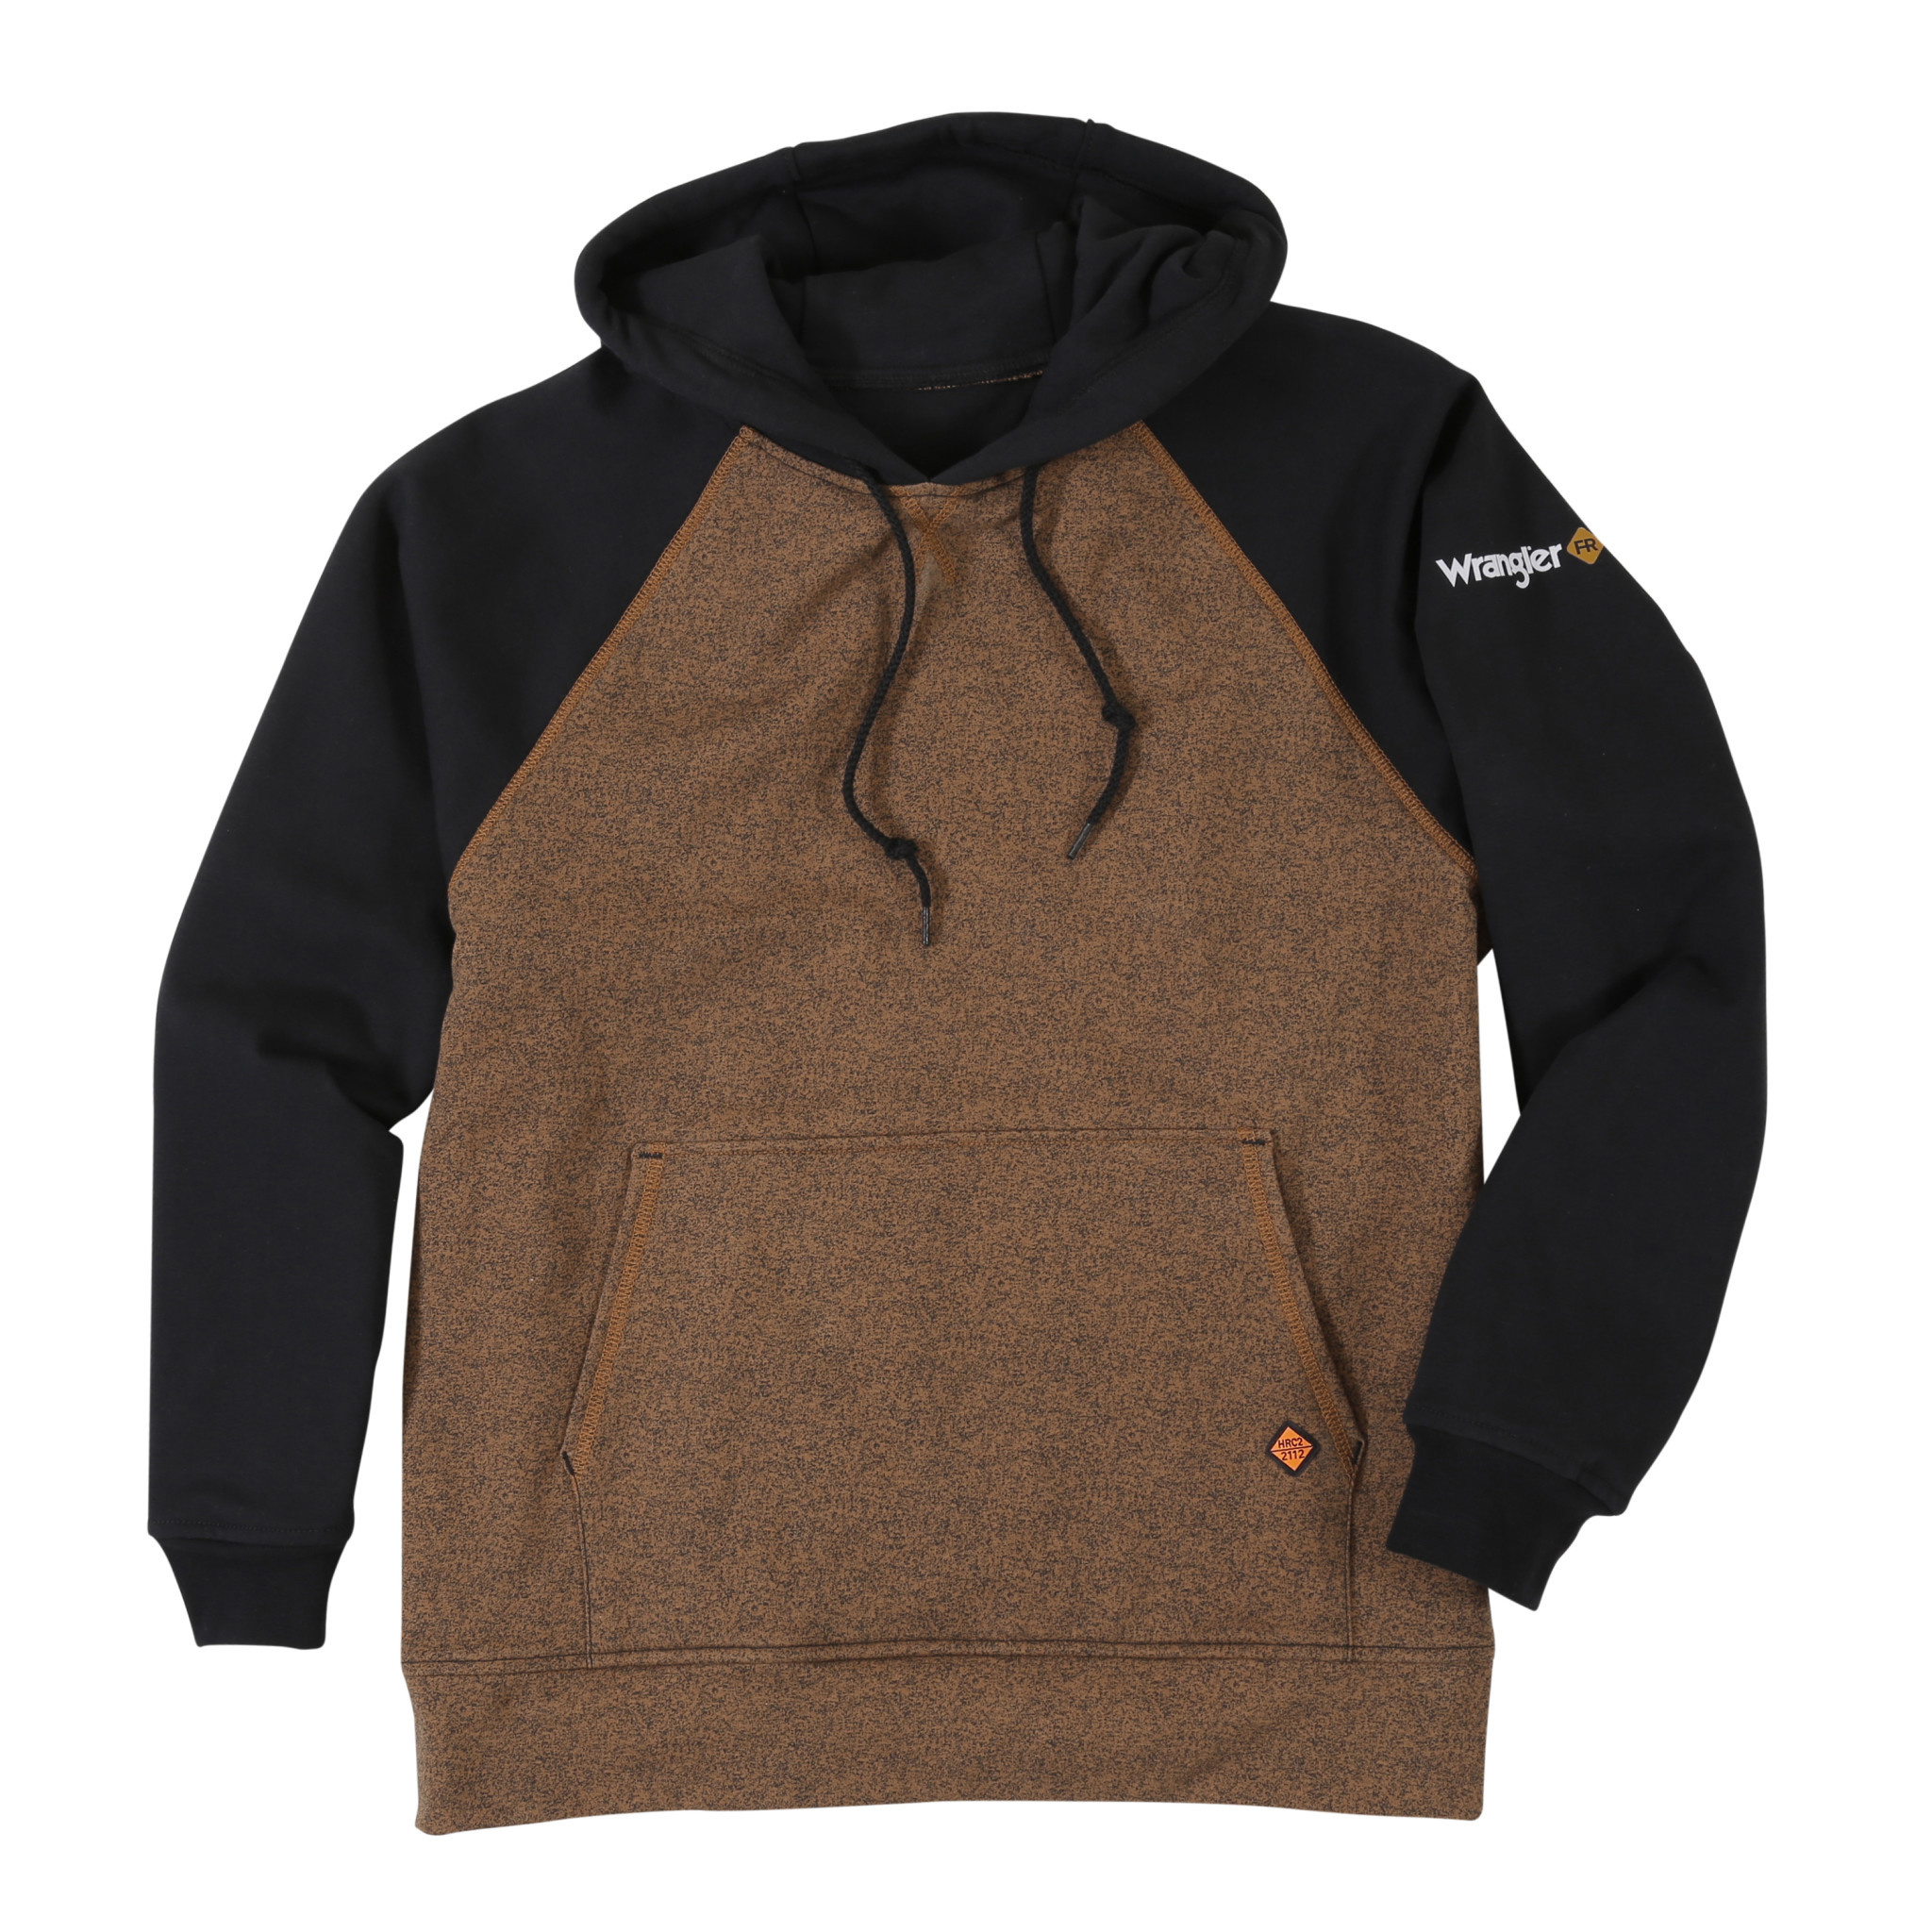 WRANGLER SWEATSHIRT - PULLOVER - Rocky Mountain FR Clothing Outlet